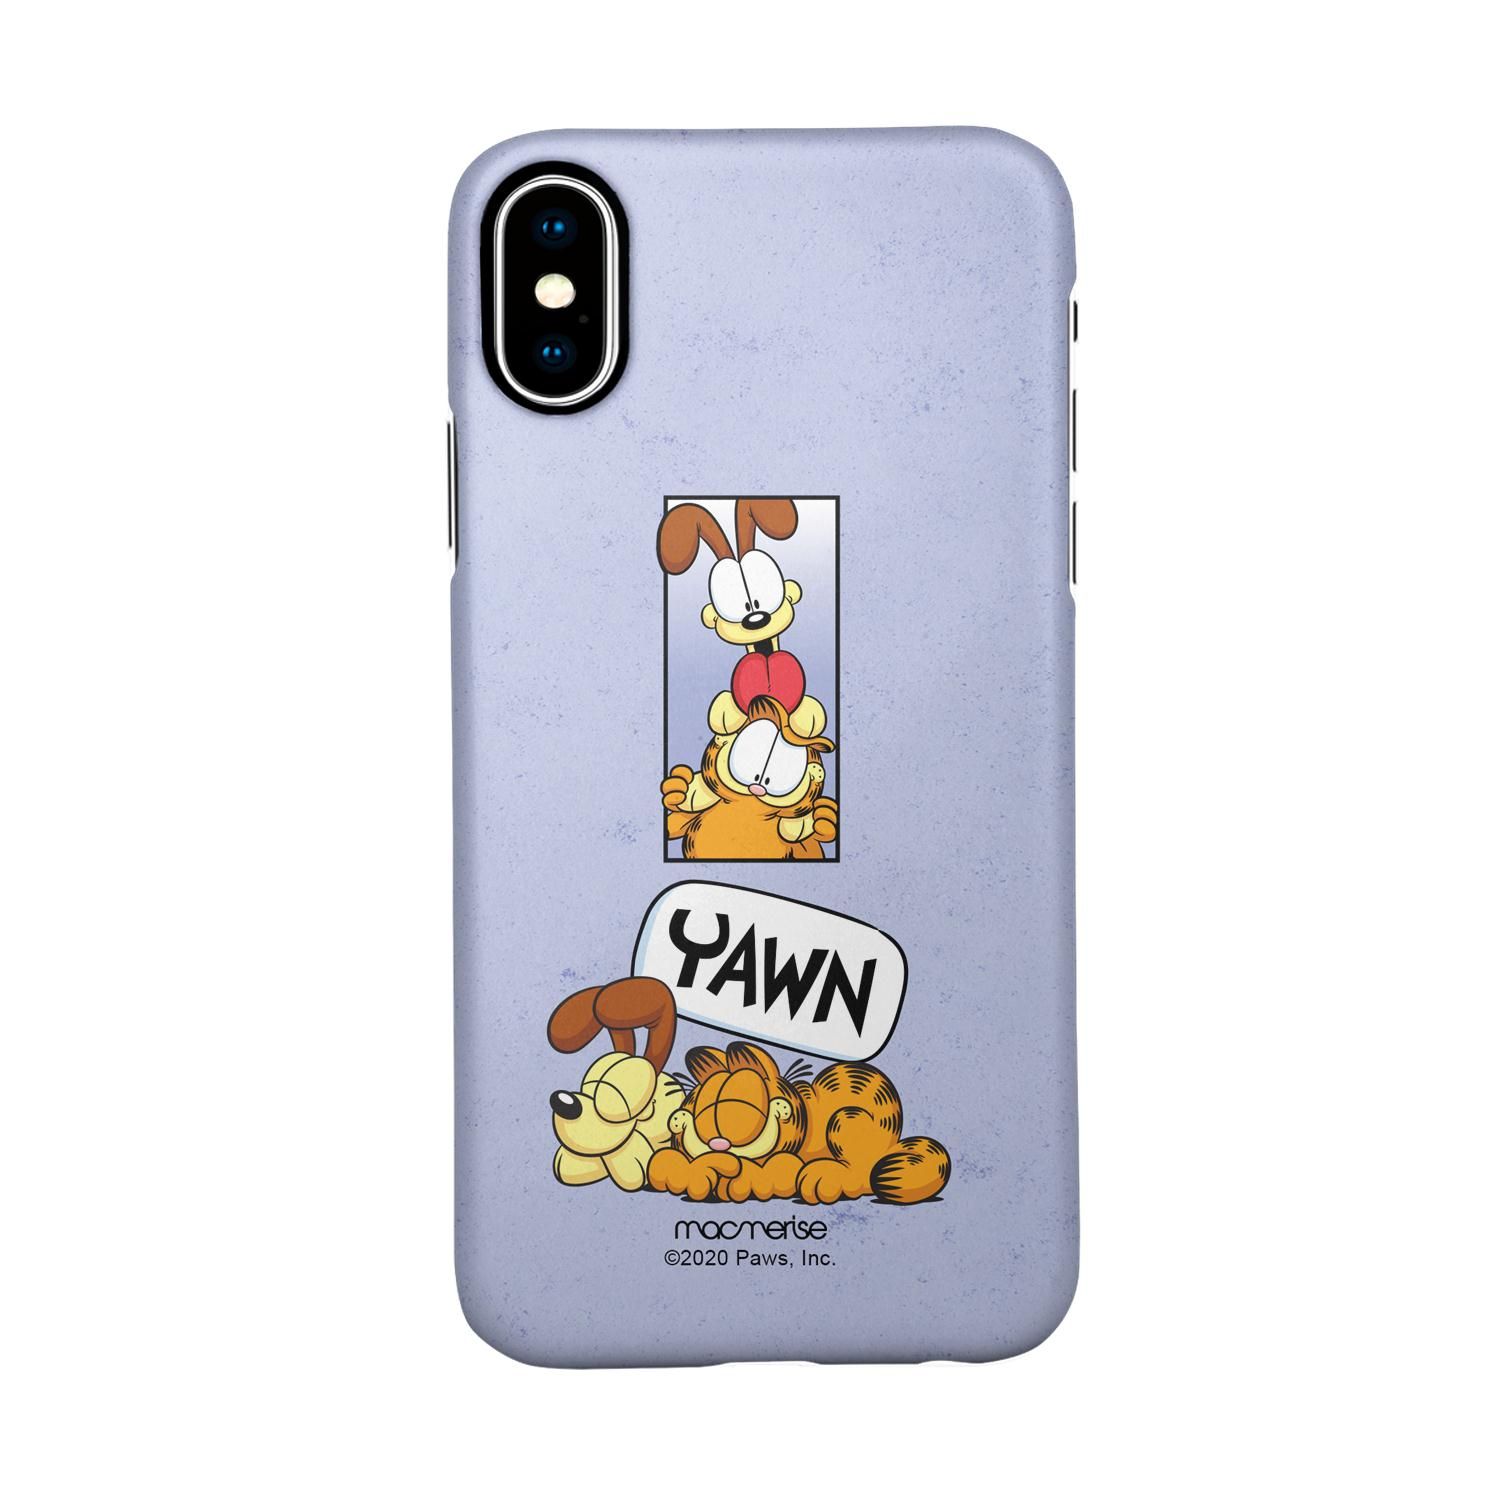 Bff for Life - Sleek Case for iPhone XS